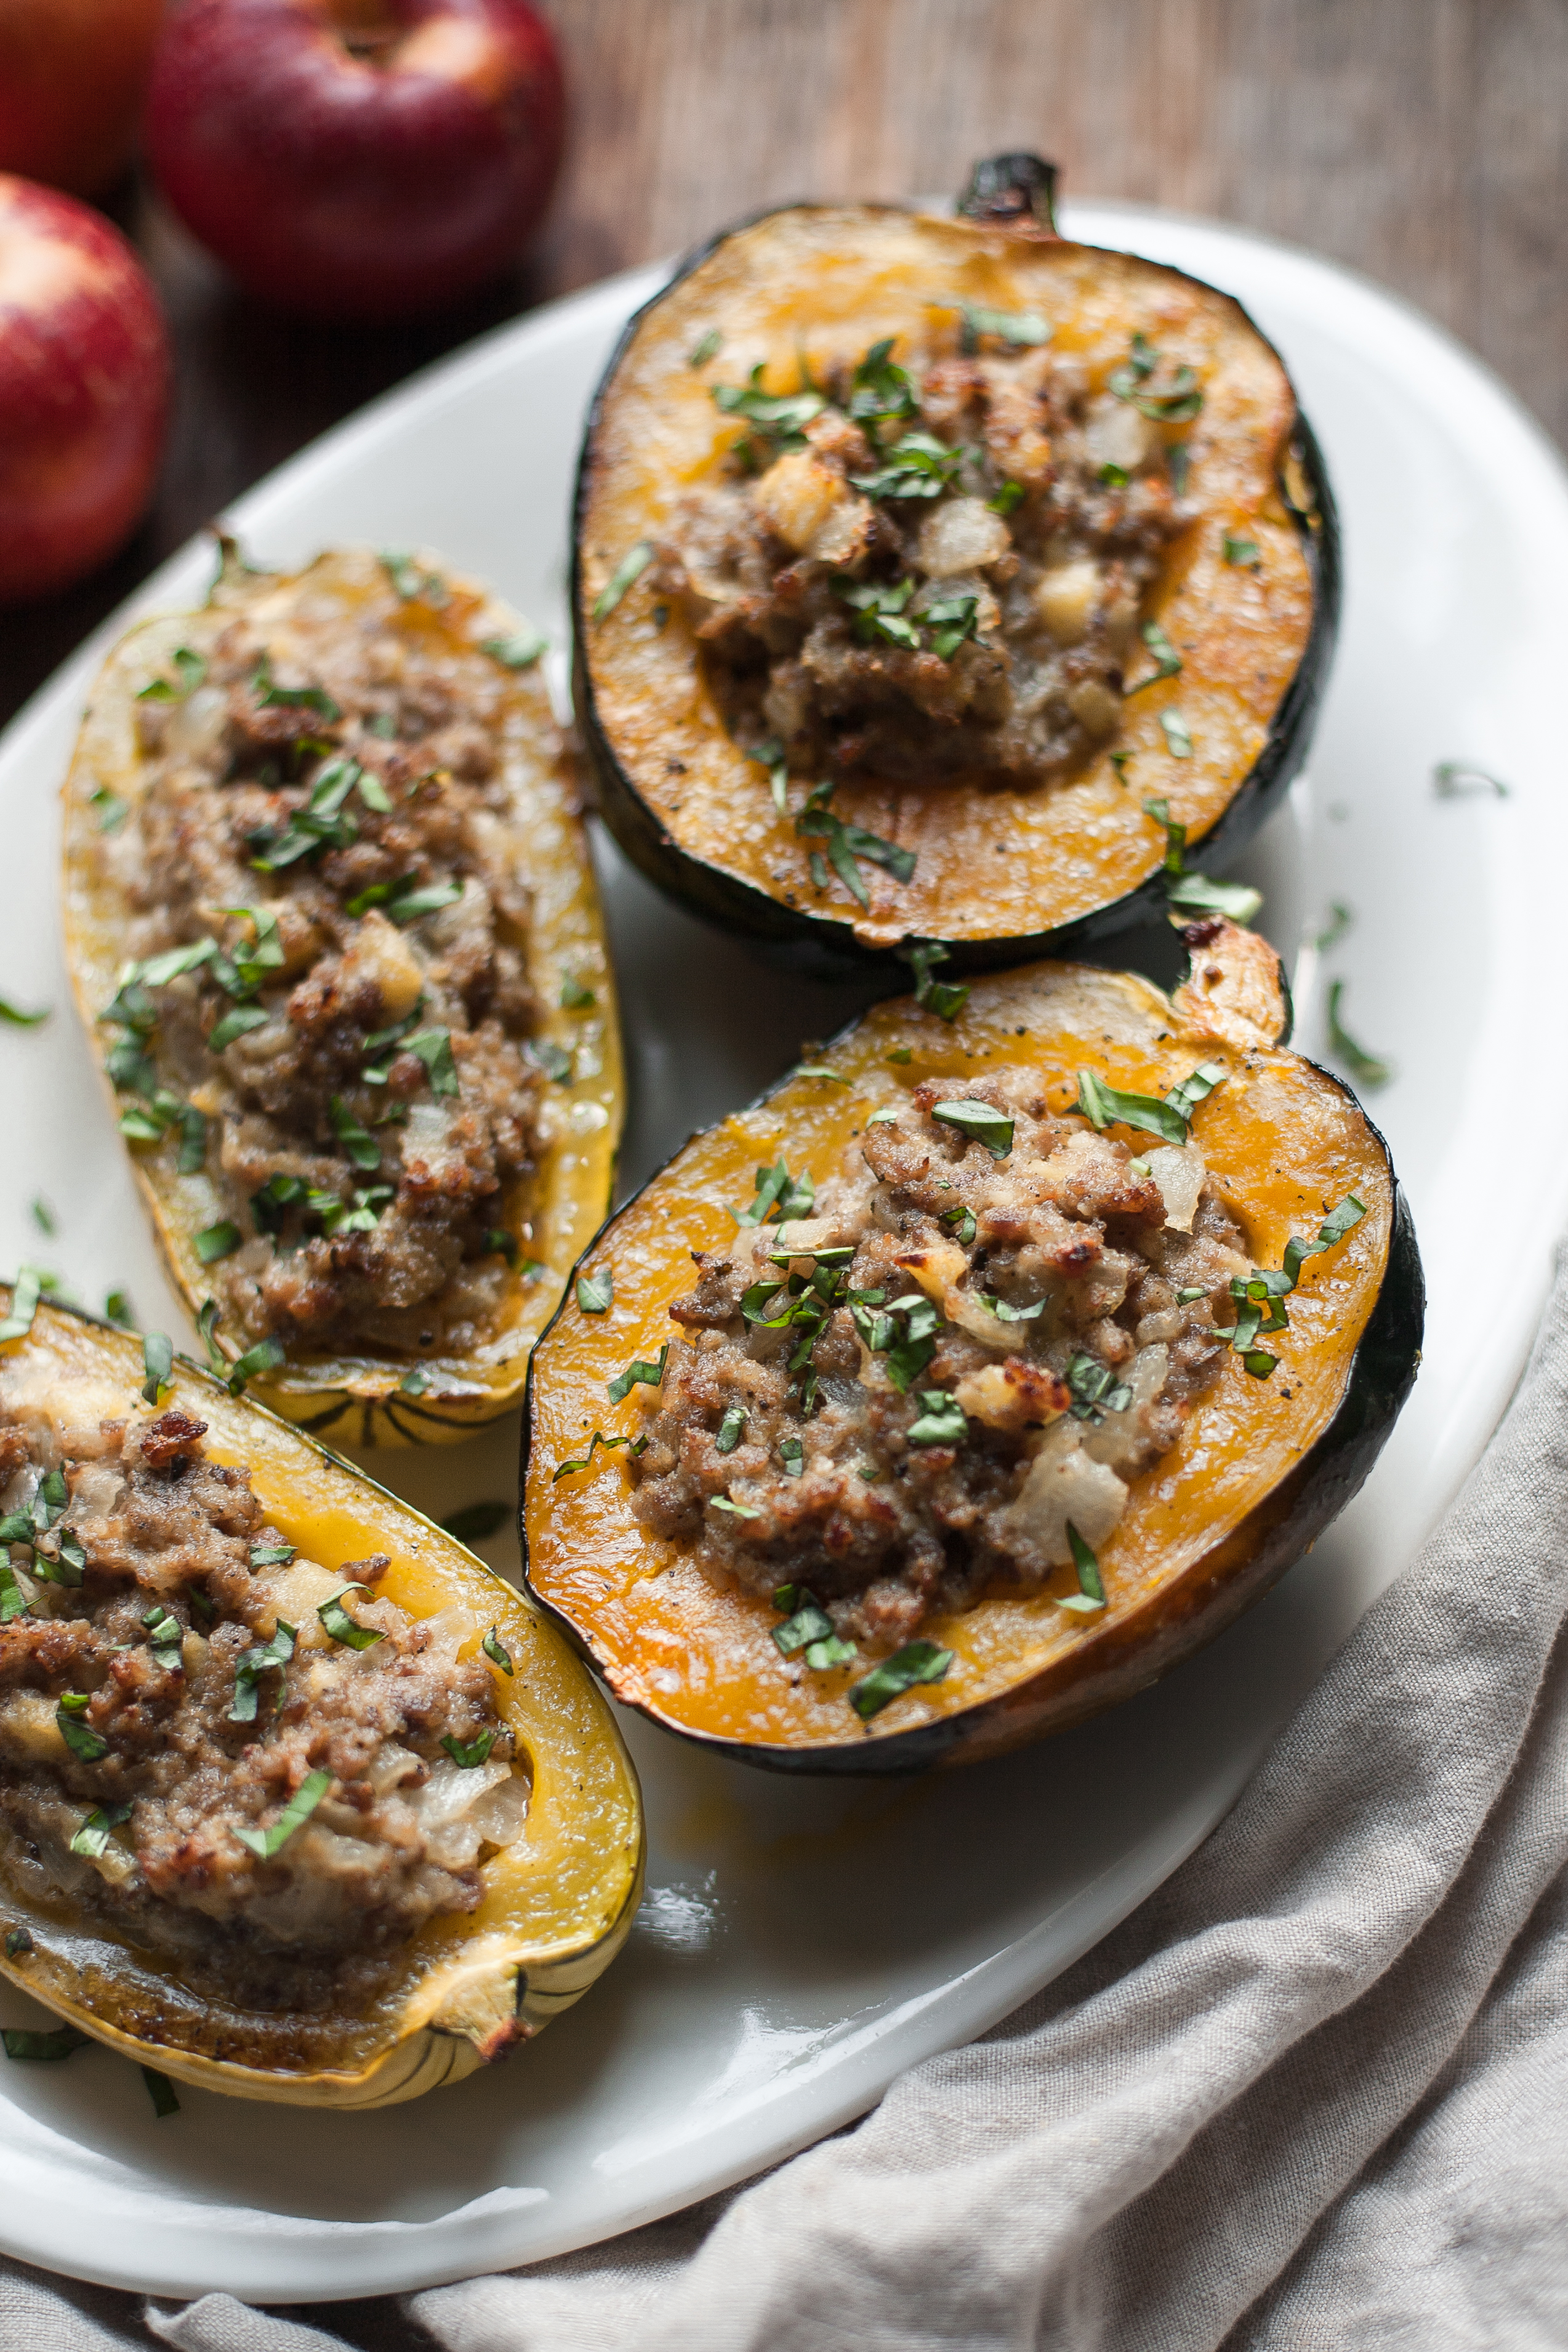 Stuffed Squash with Sausage and Apple